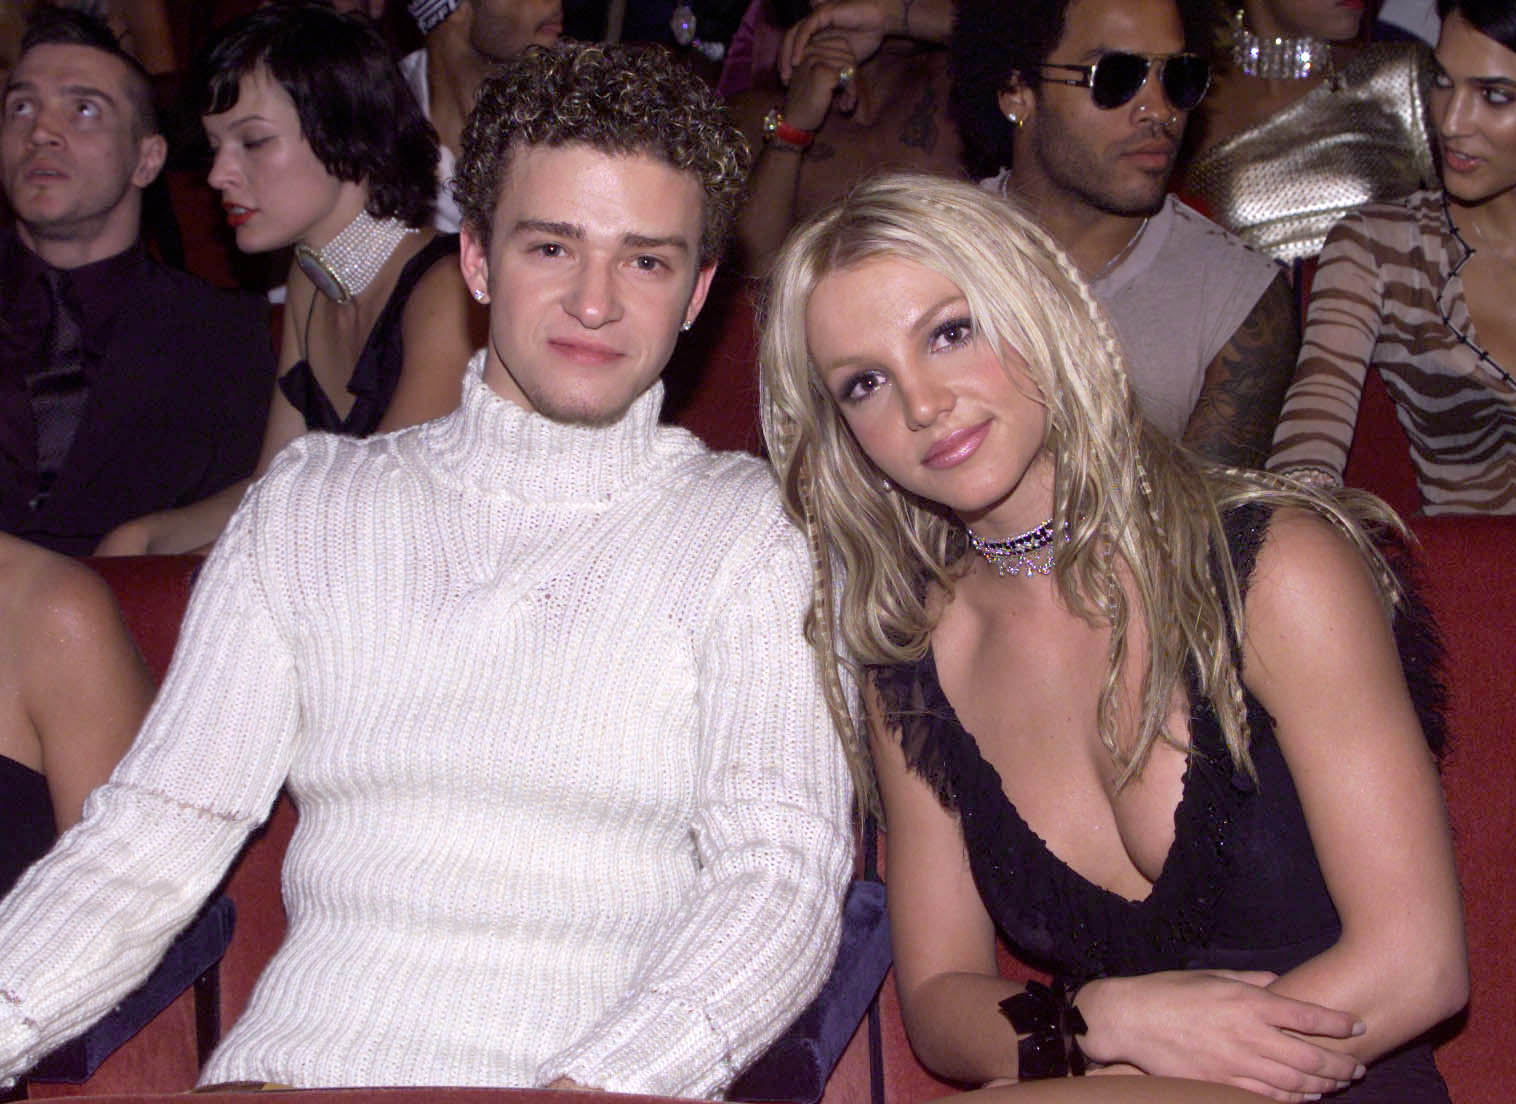 Justin Timberlake and Britney Spears in front of people